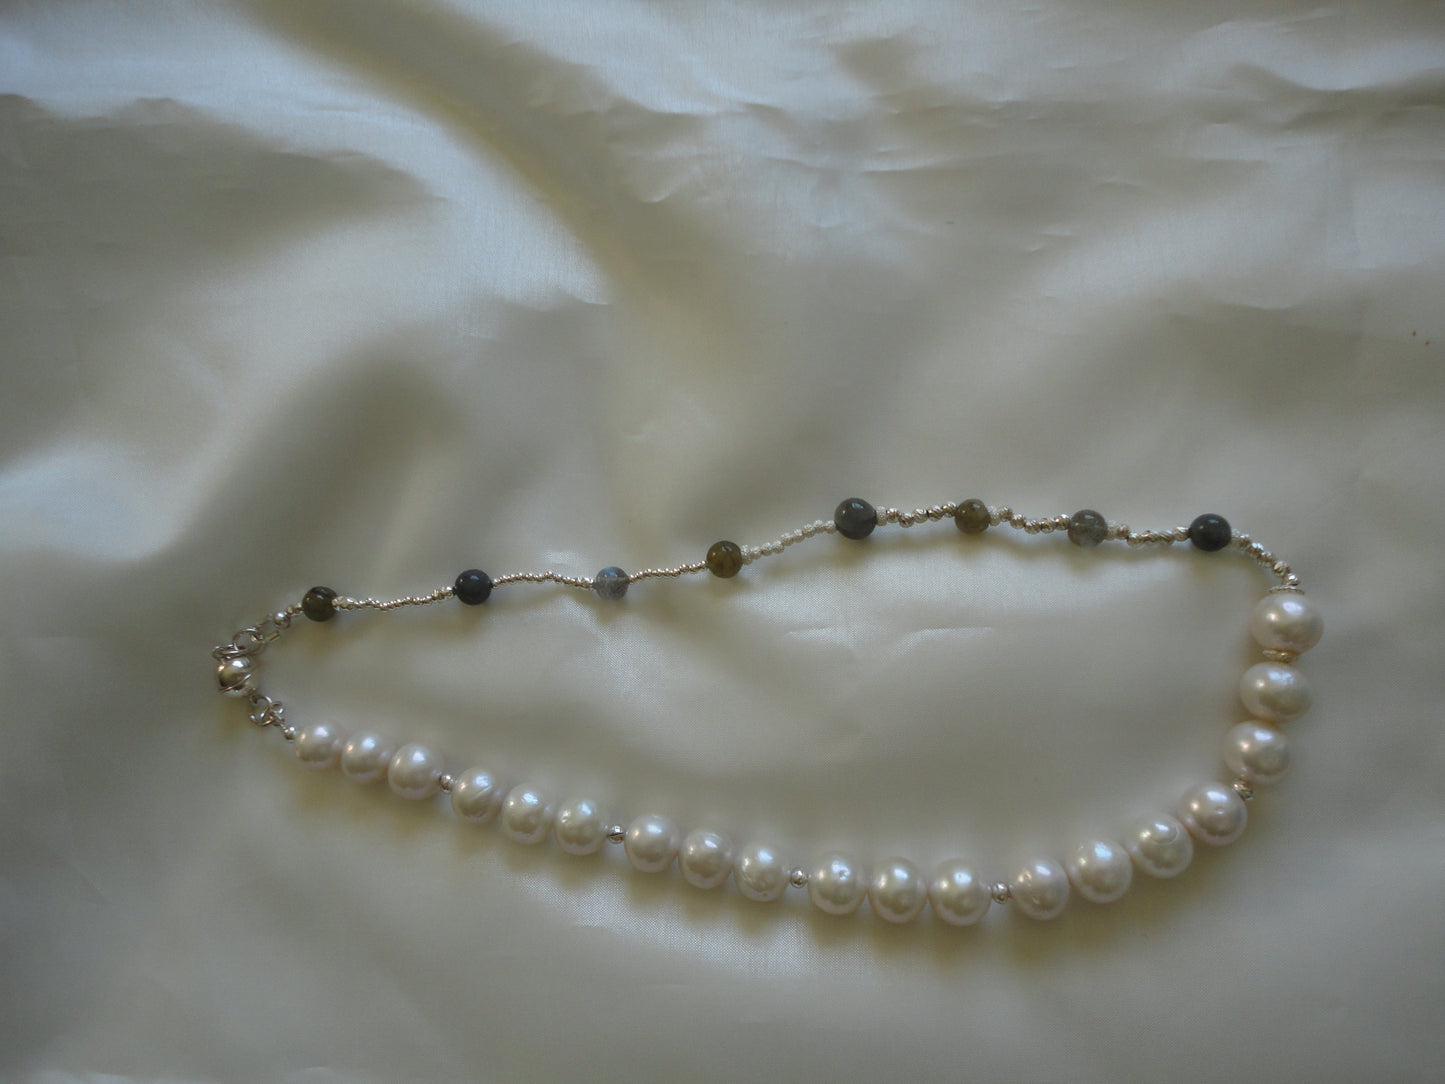 Freshwater cultured pearls and labradorite asymmetric neckalce with sterling silver magnetic clasp